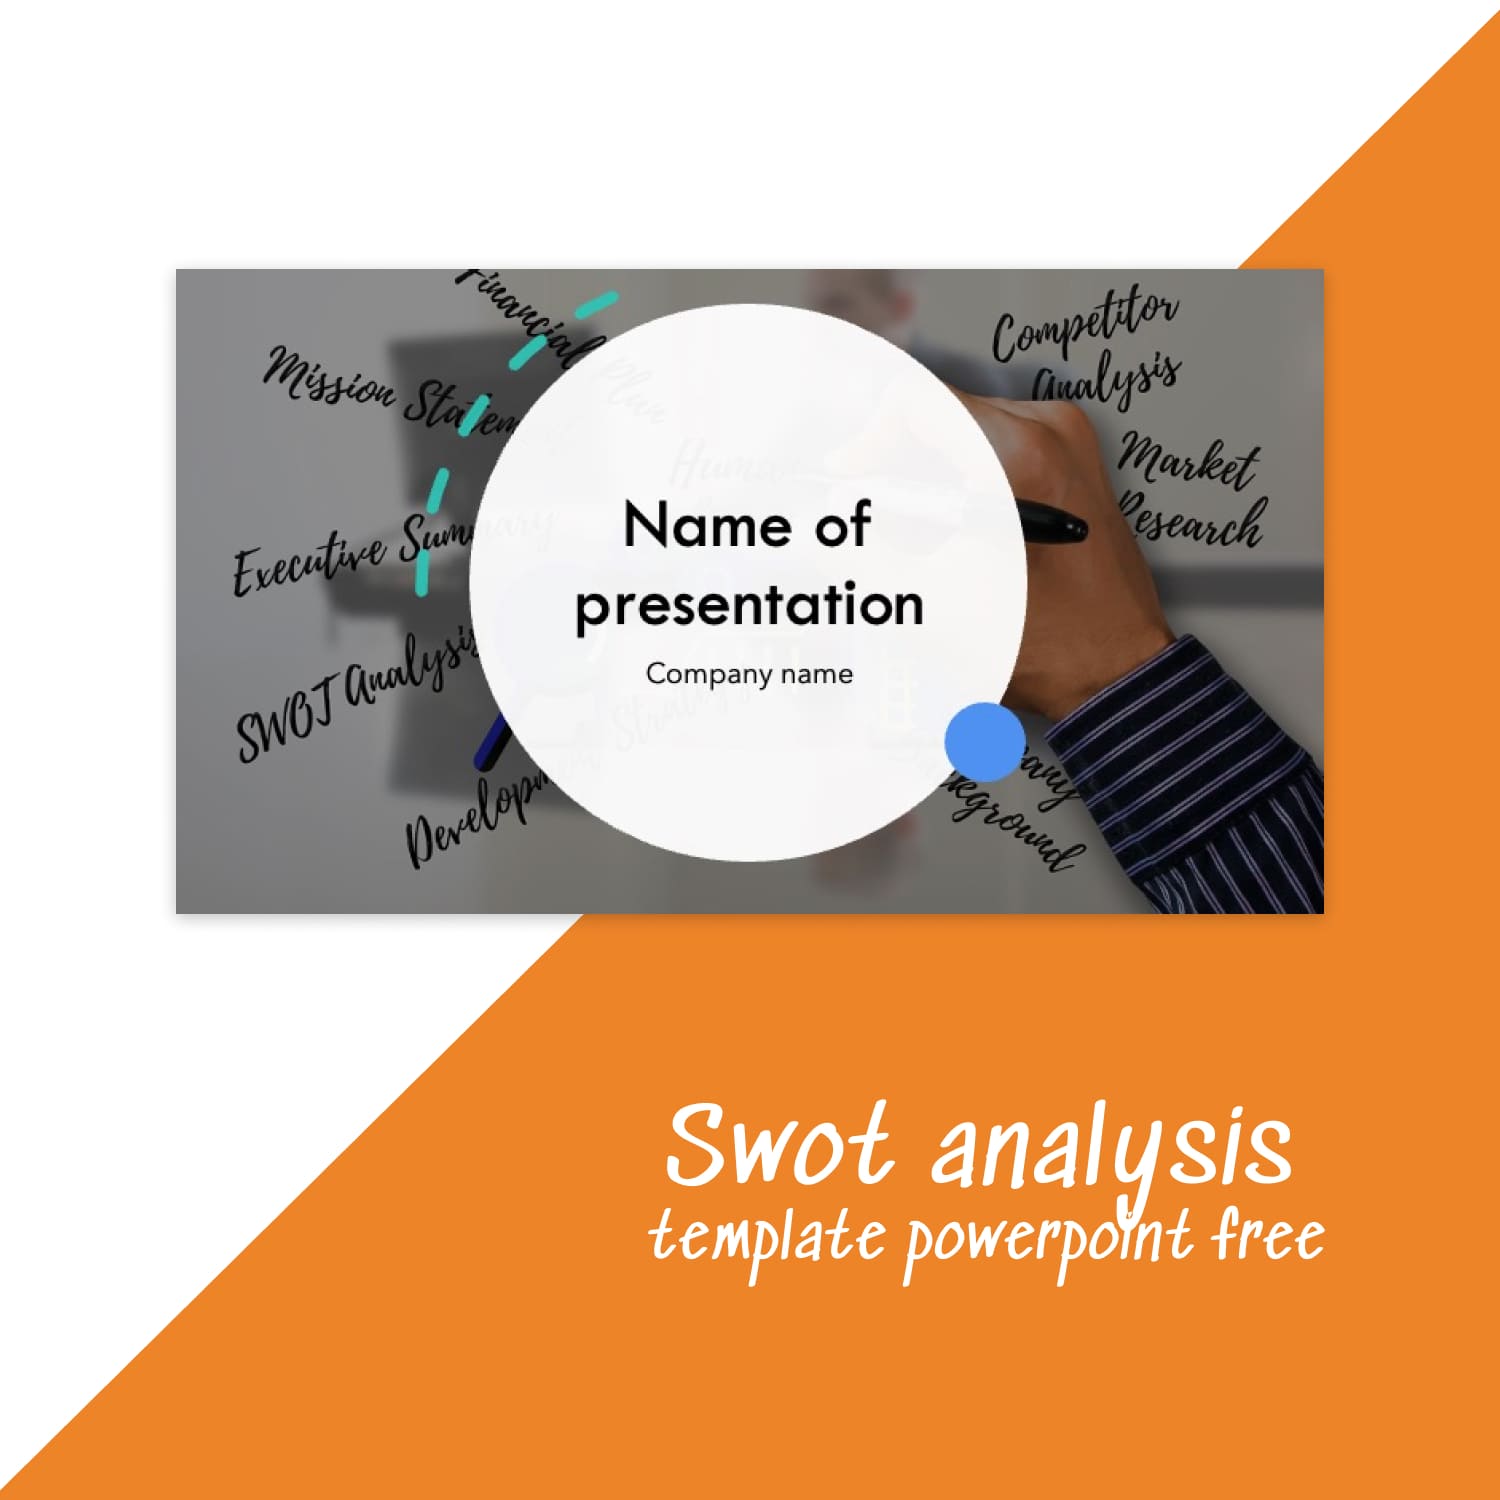 Preview images swot analysis template powerpoint.